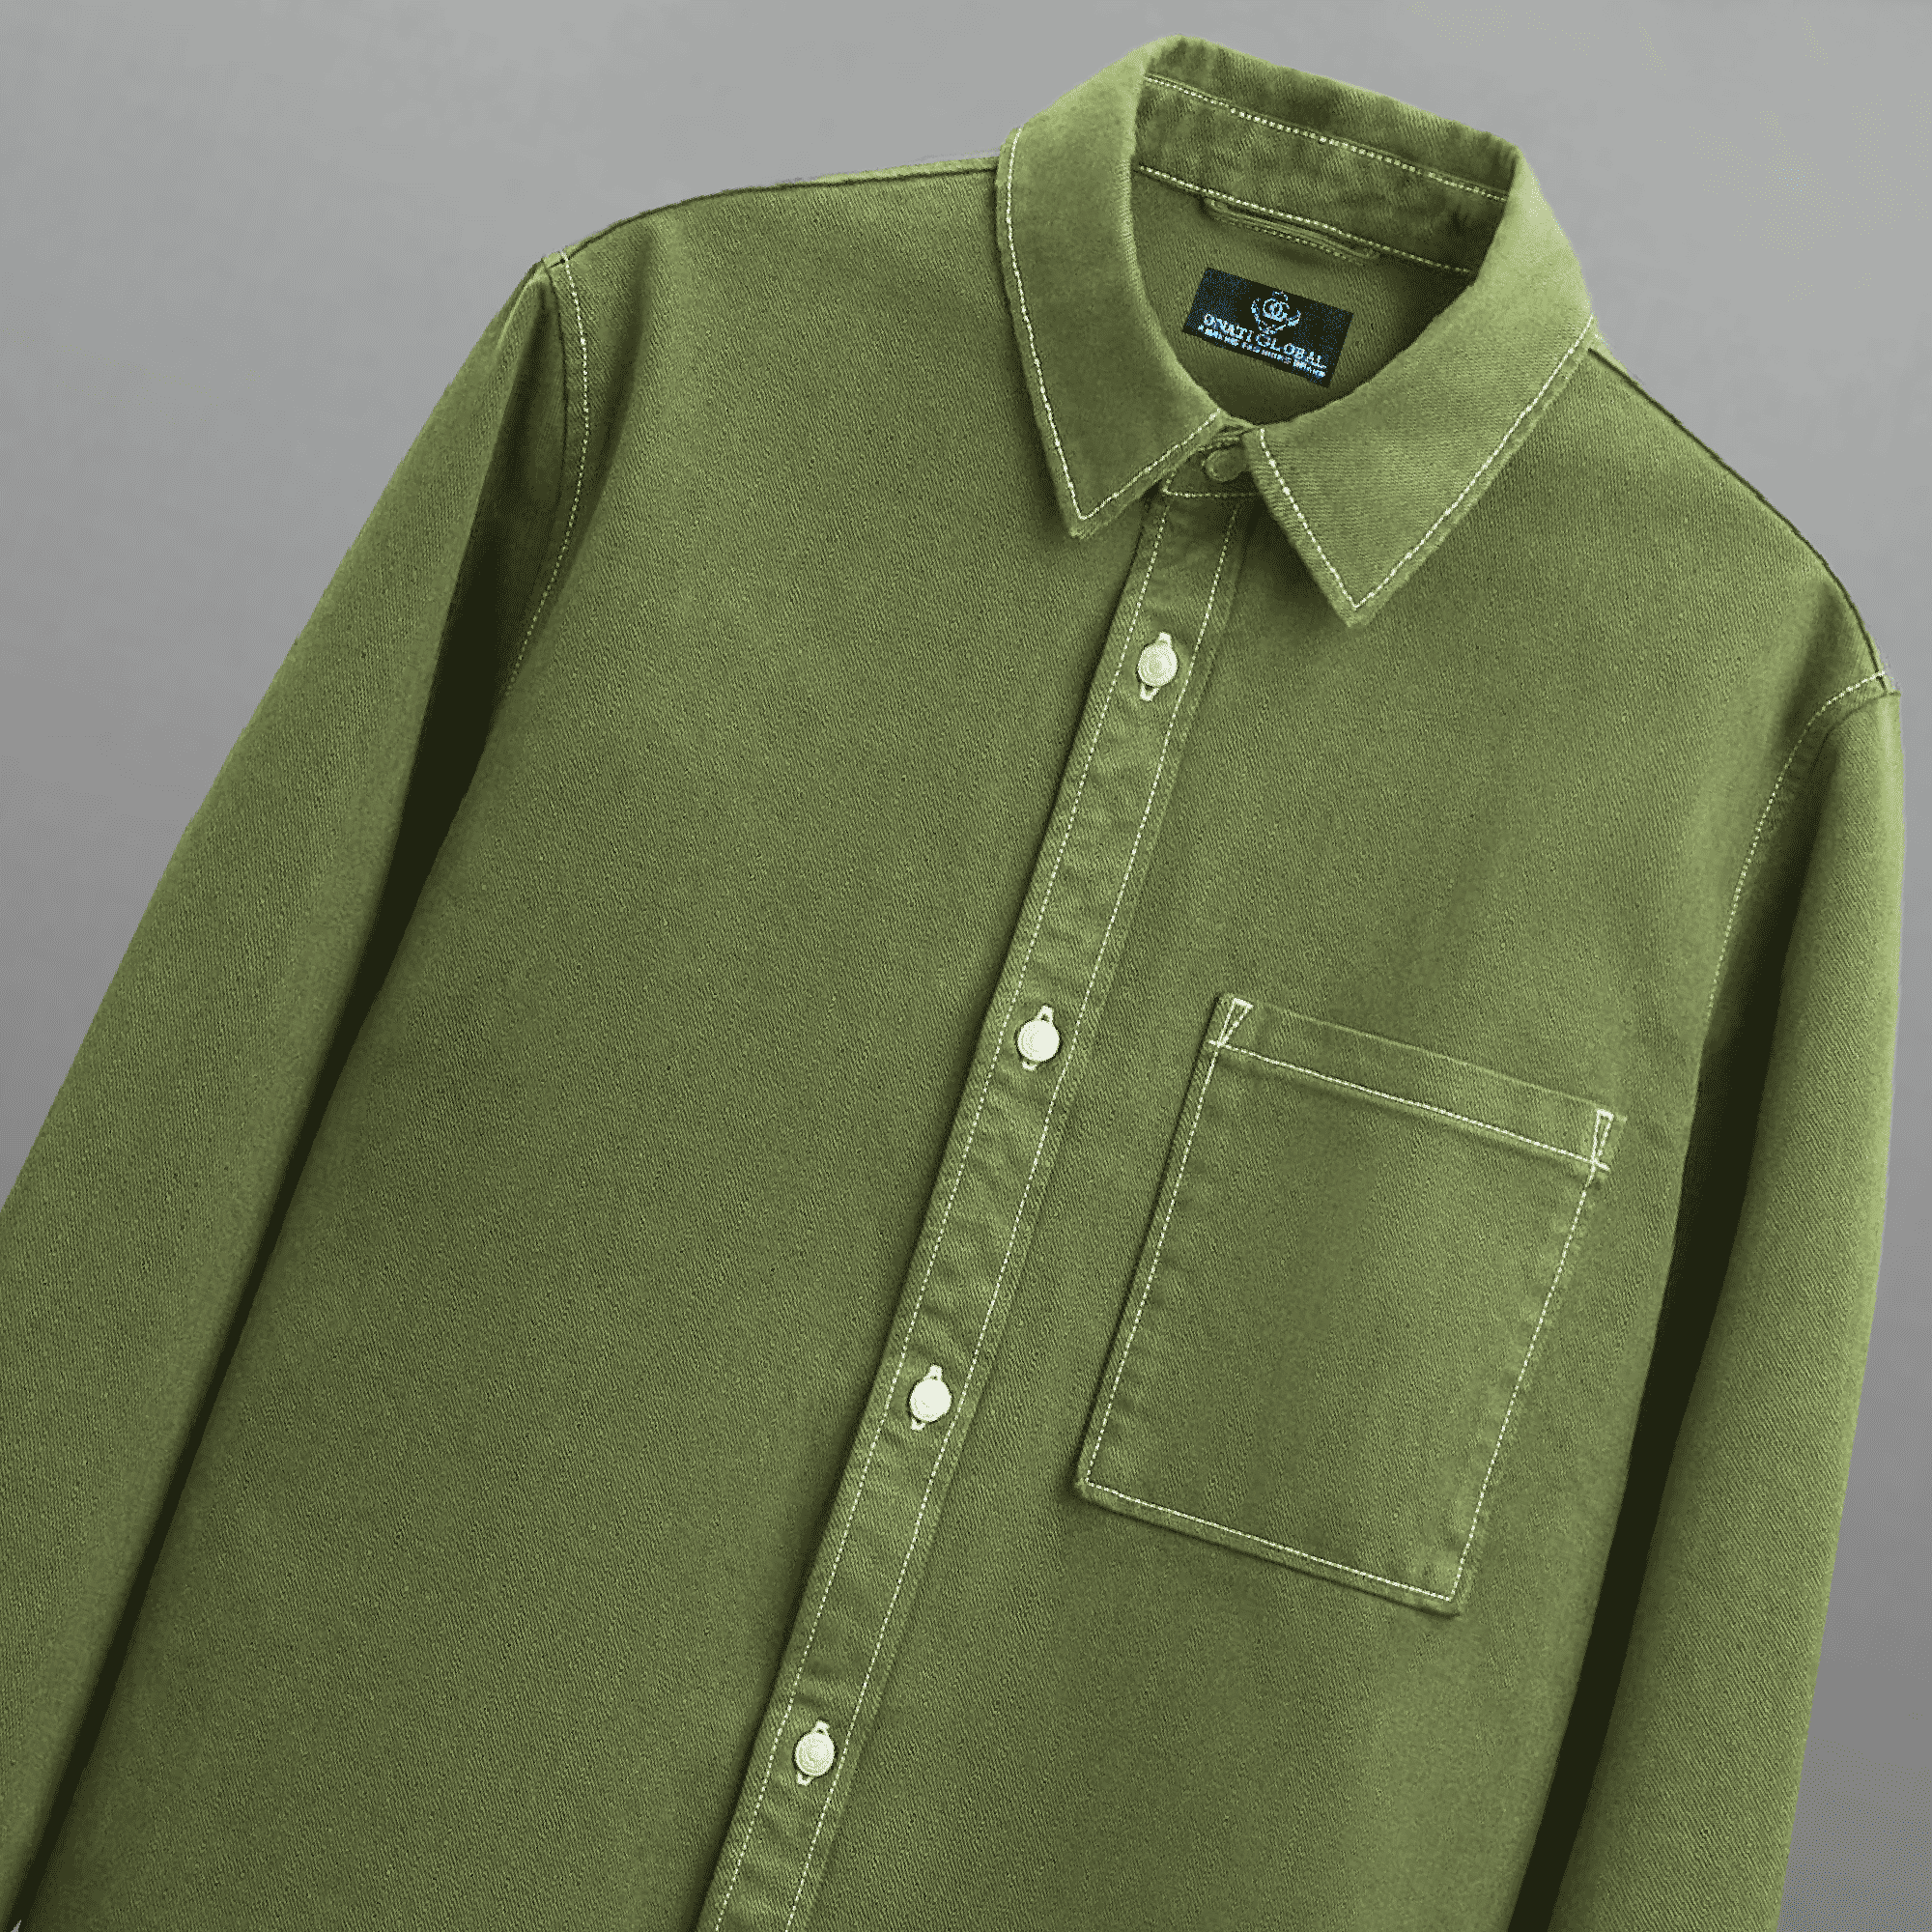 Men's Full sleeve Green shirt with a pocket-RMS054